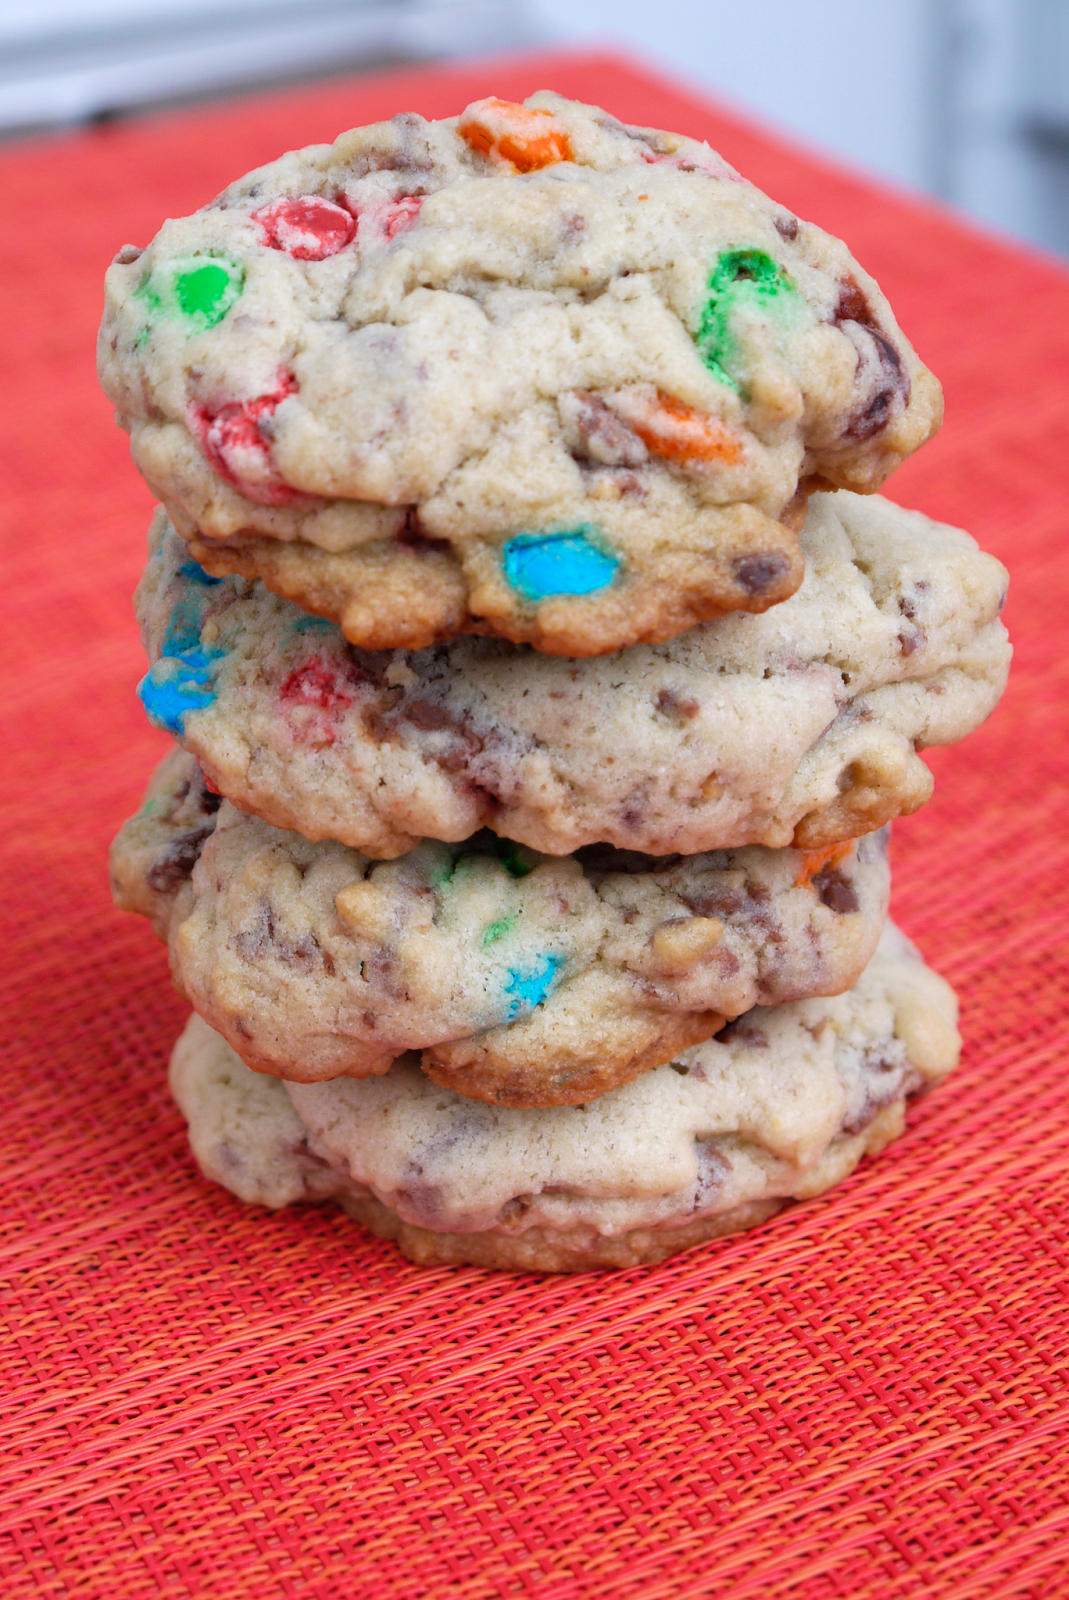 Leftover Candy Cookies: An easy way to use up leftover holiday candy using a basic chocolate chip cookie recipe. Chewy and chock-full of flavor! | stressbaking.com